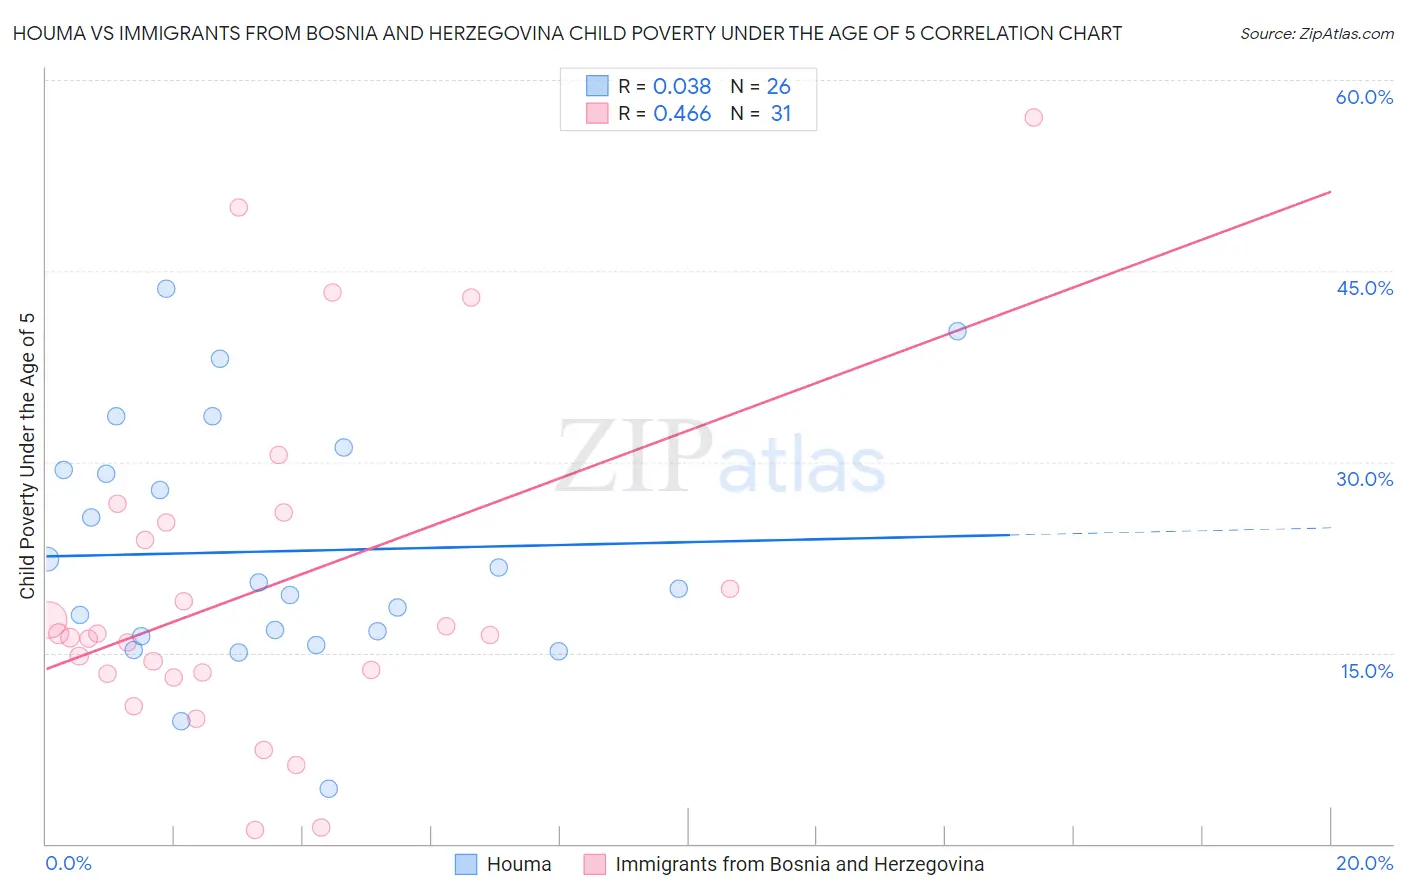 Houma vs Immigrants from Bosnia and Herzegovina Child Poverty Under the Age of 5